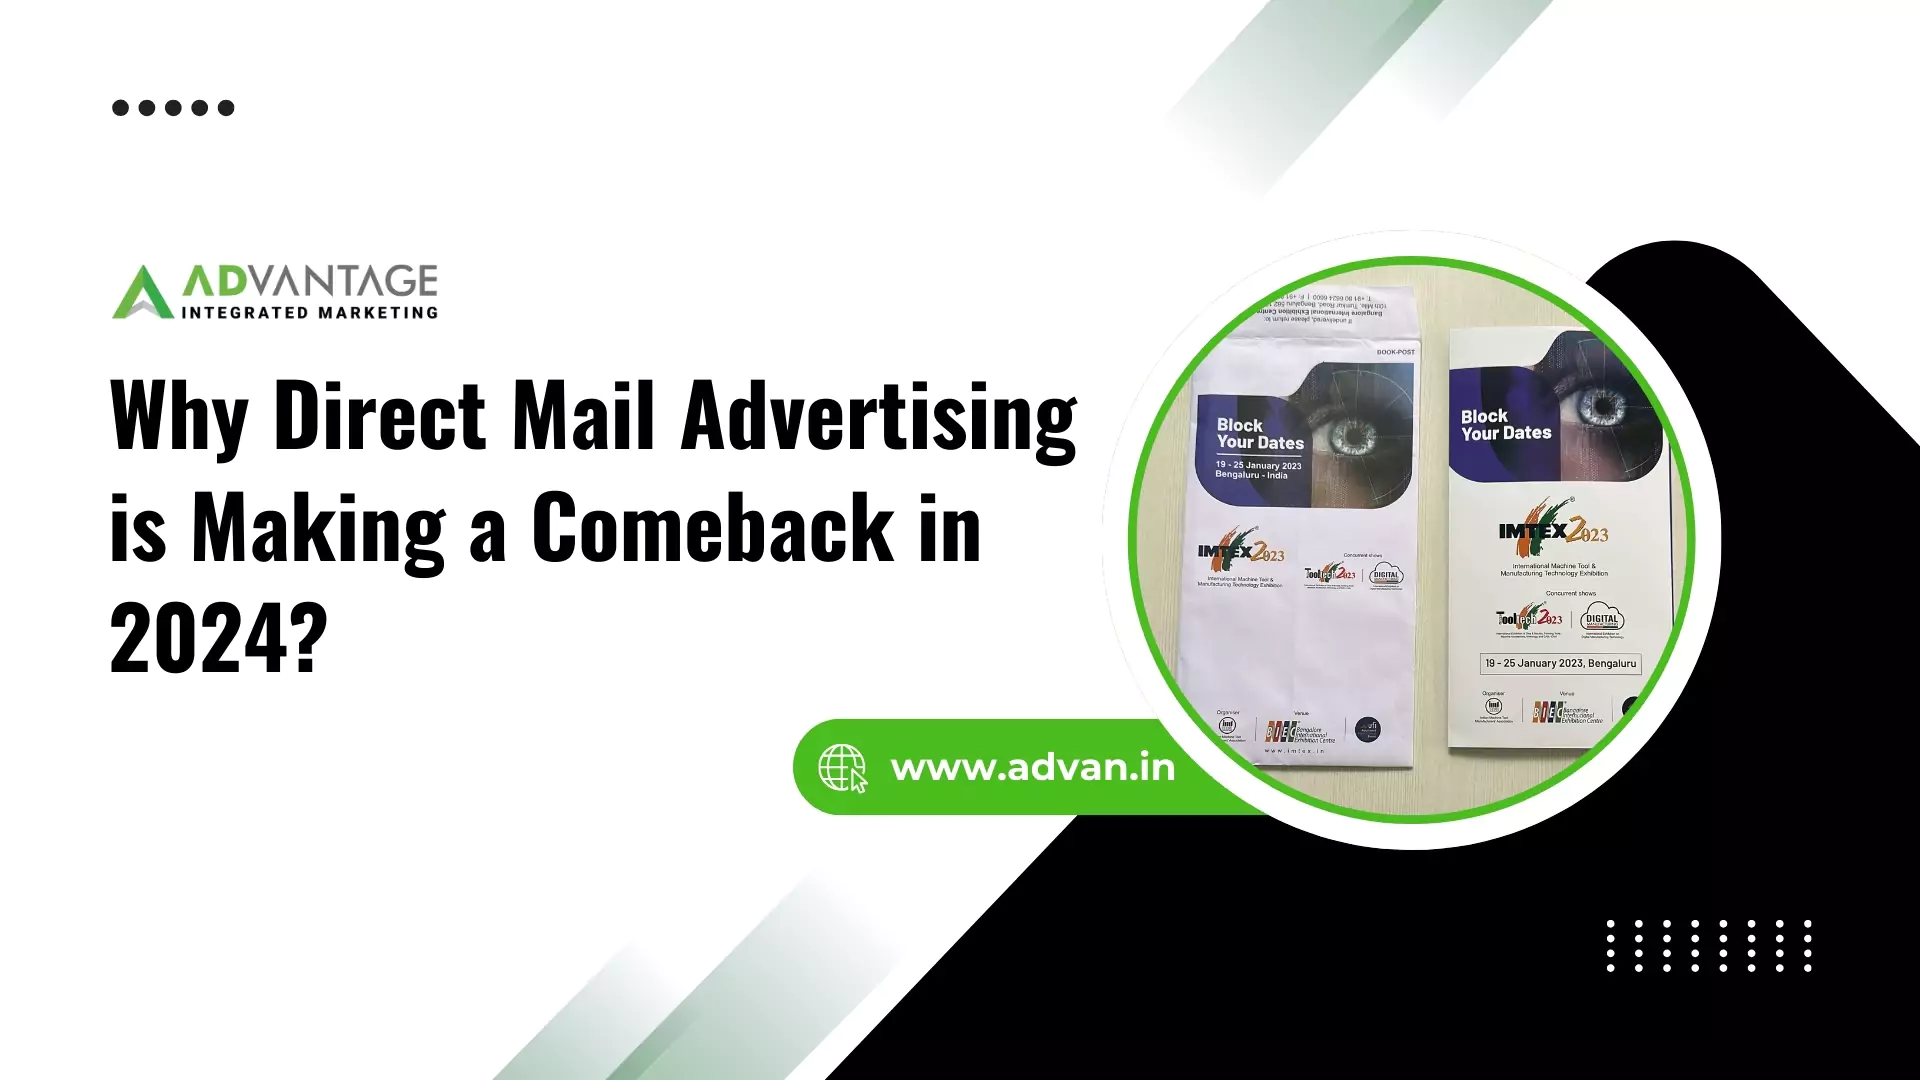 direct-mail-advertising-ad-vantage